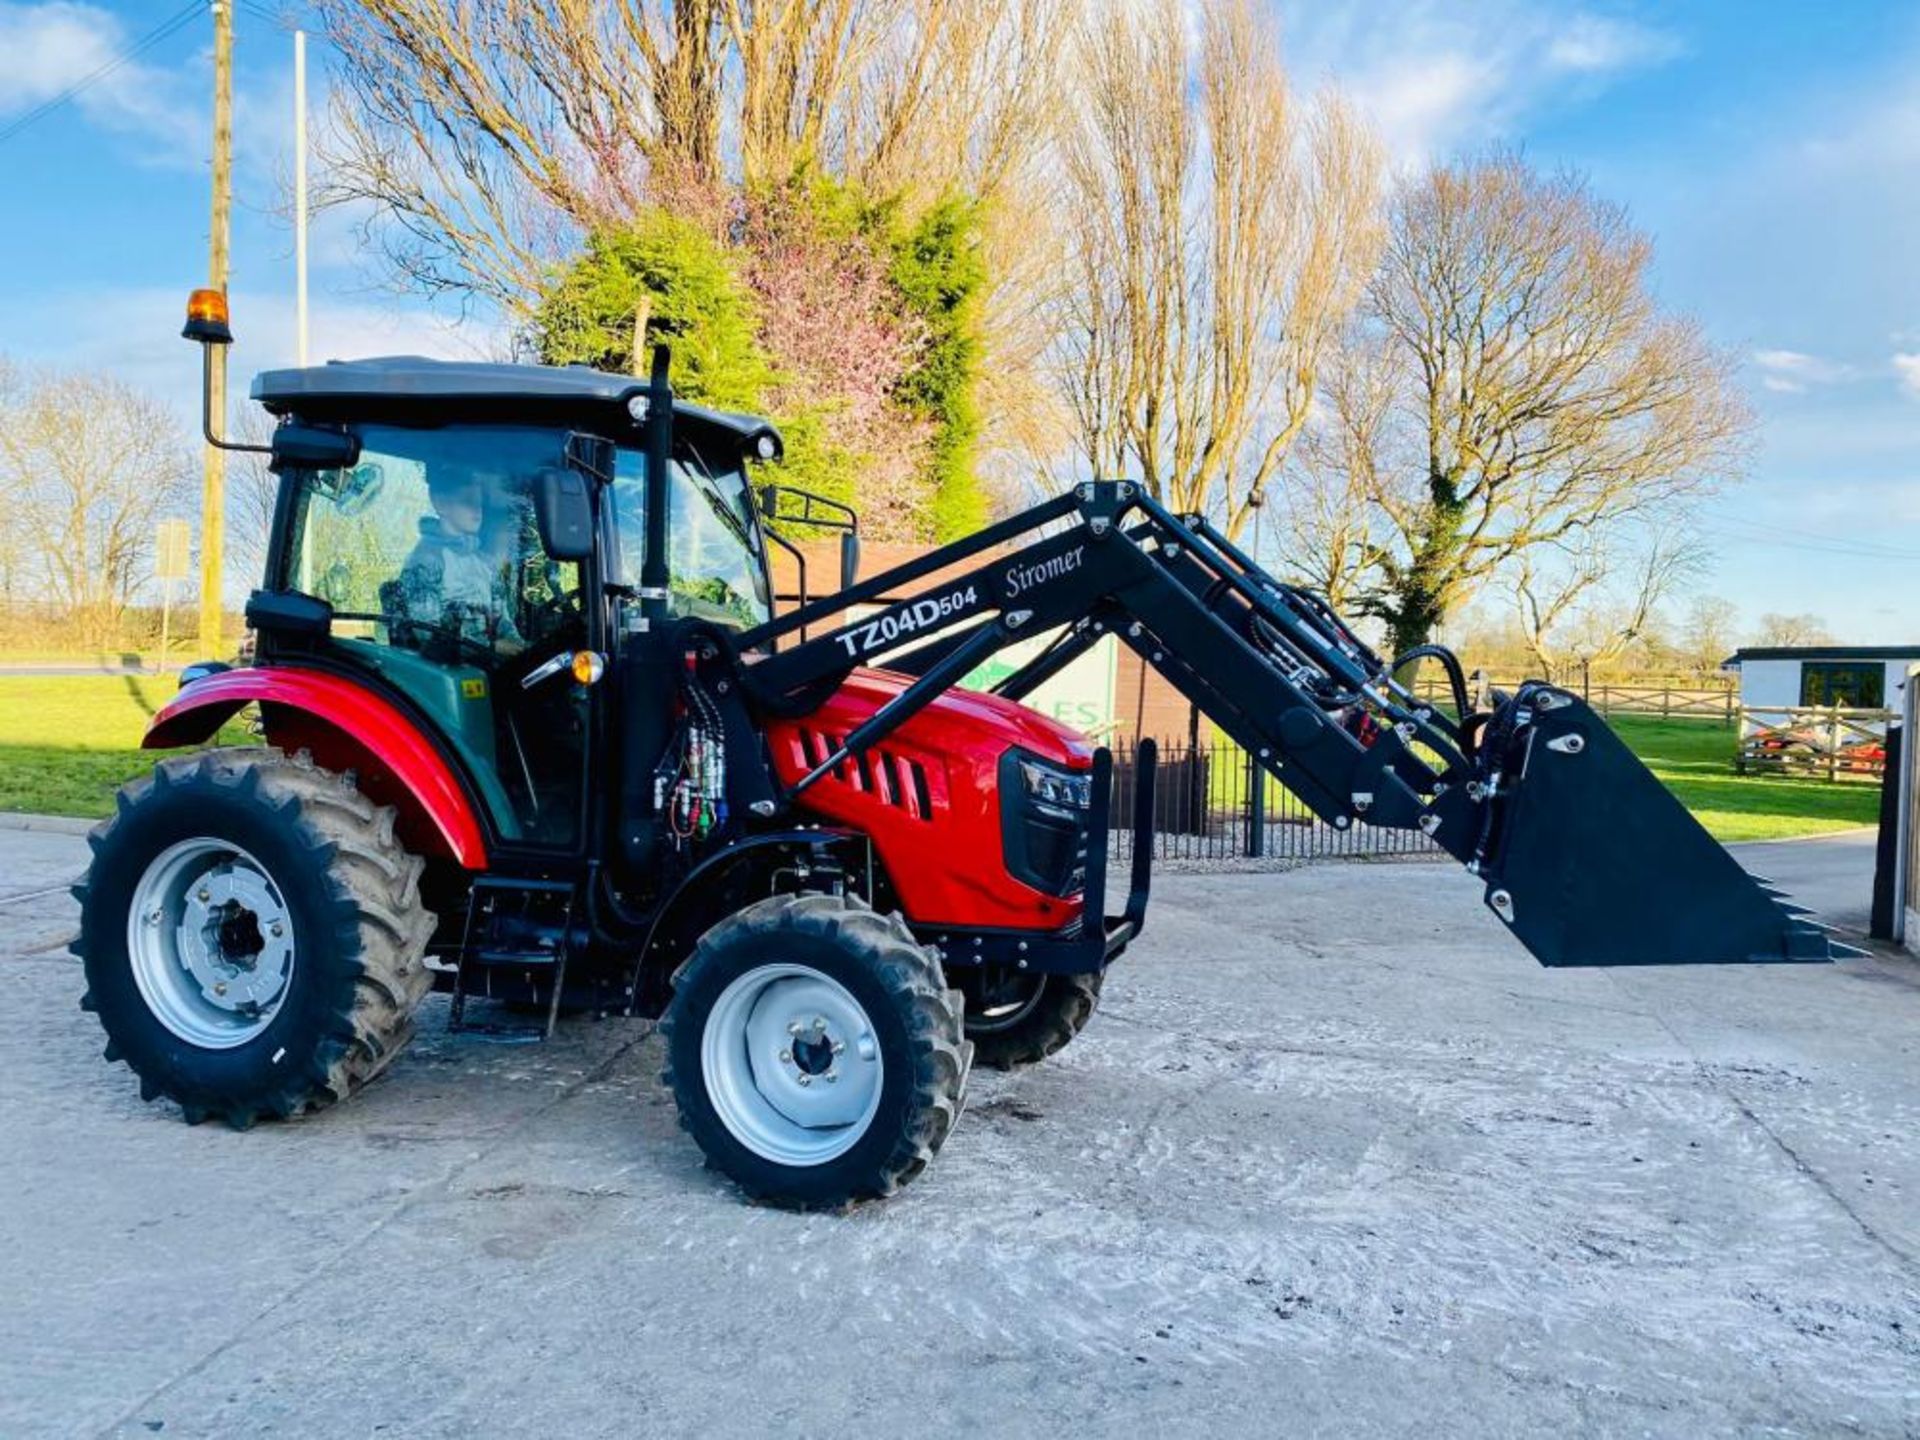 BRAND NEW SIROMER 504 4WD TRACTOR WITH SYNCHRO CAB AND LOADER